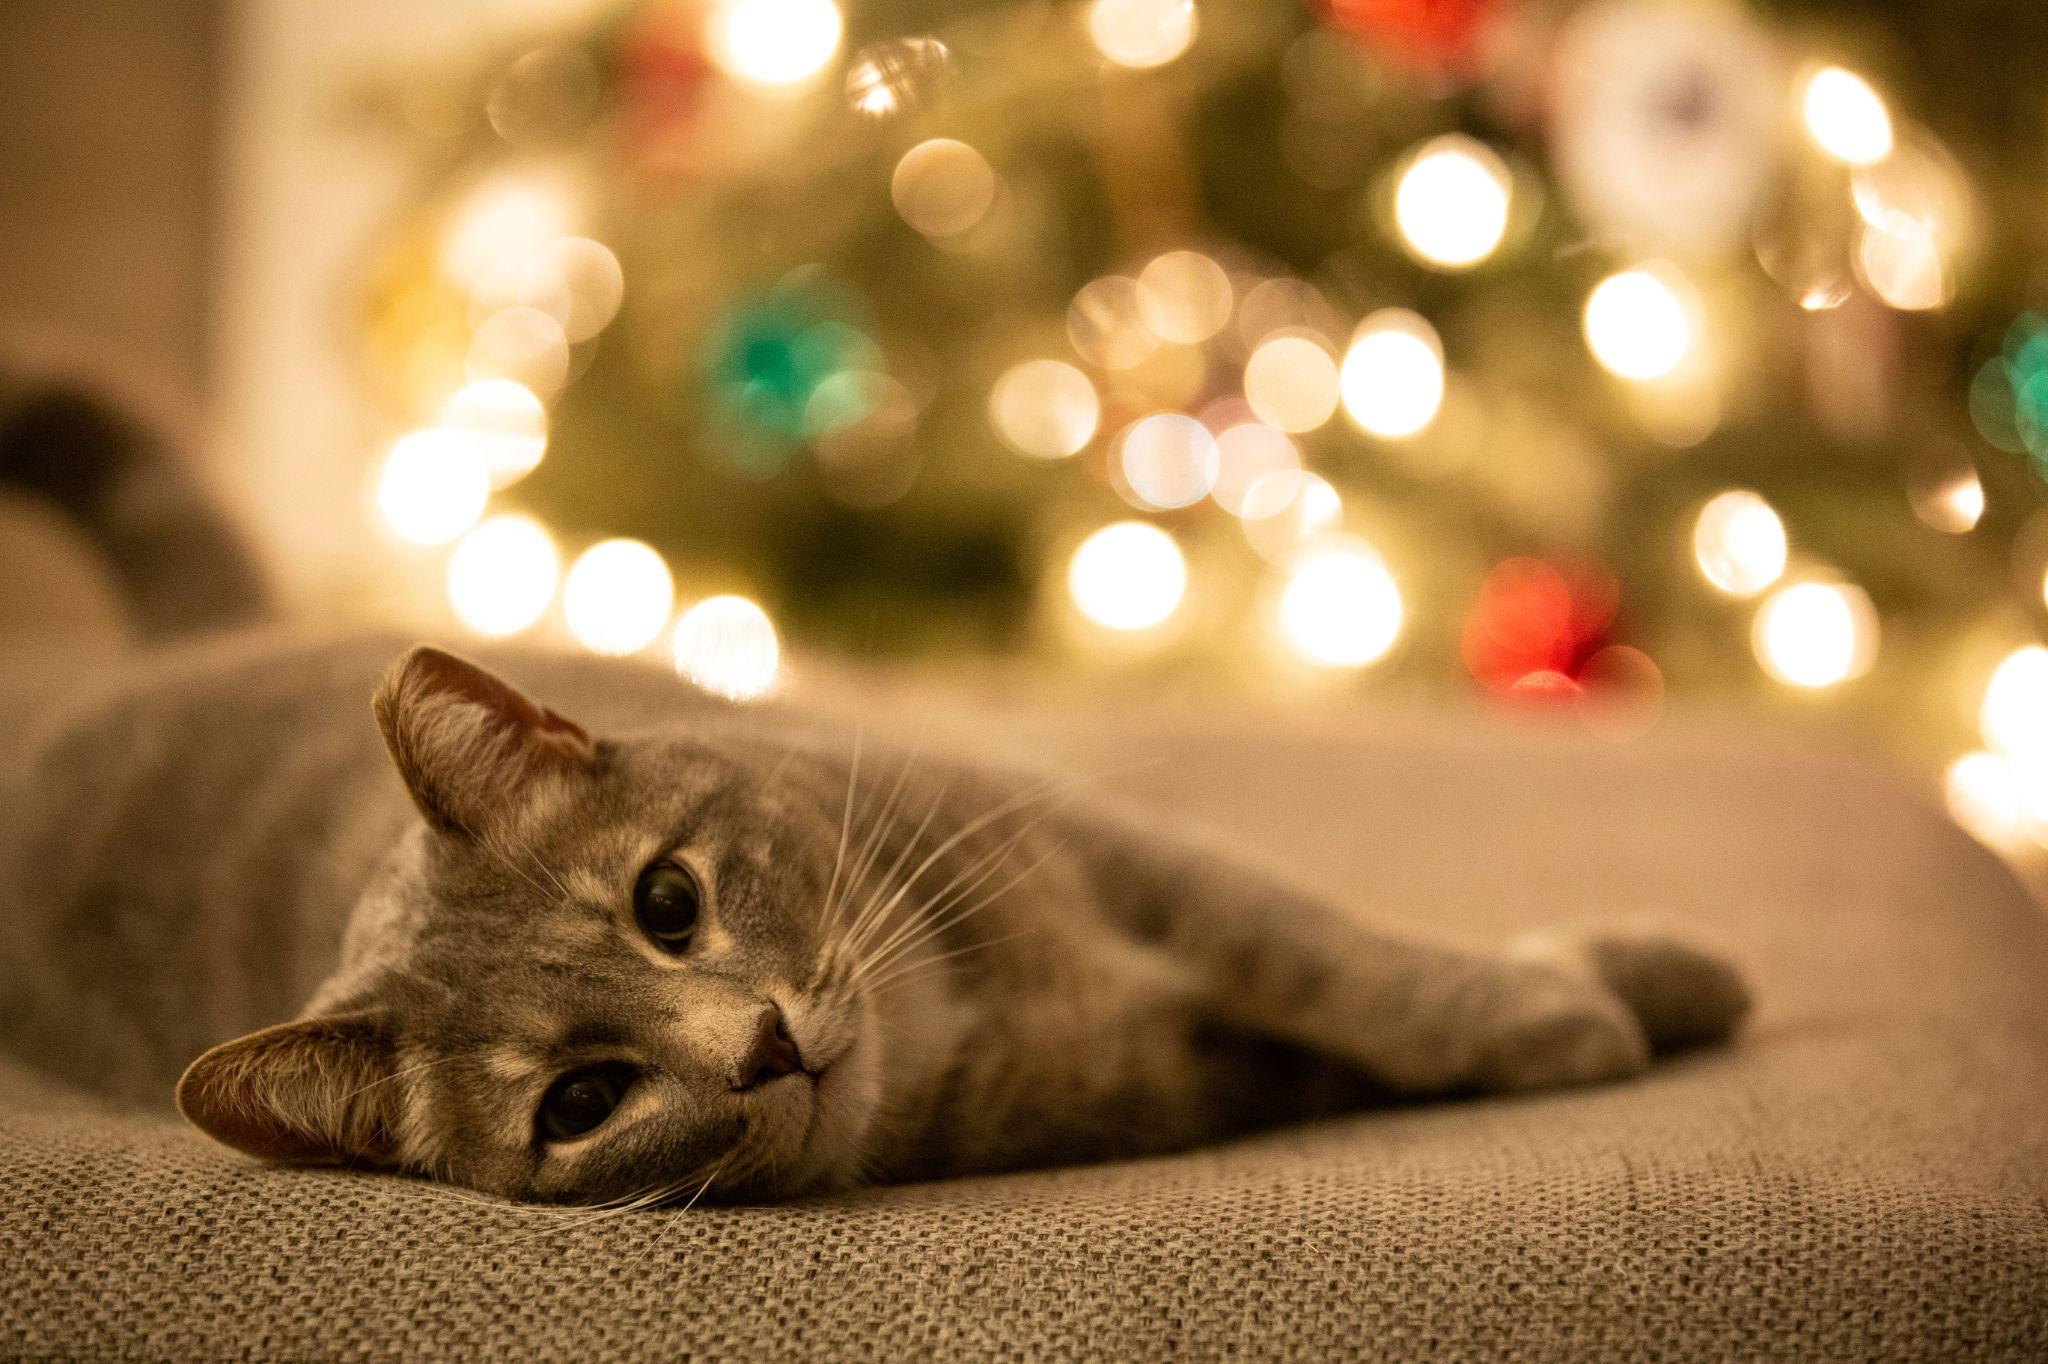 4 Things to Do Before Leaving a Cat for a Holiday Vacation